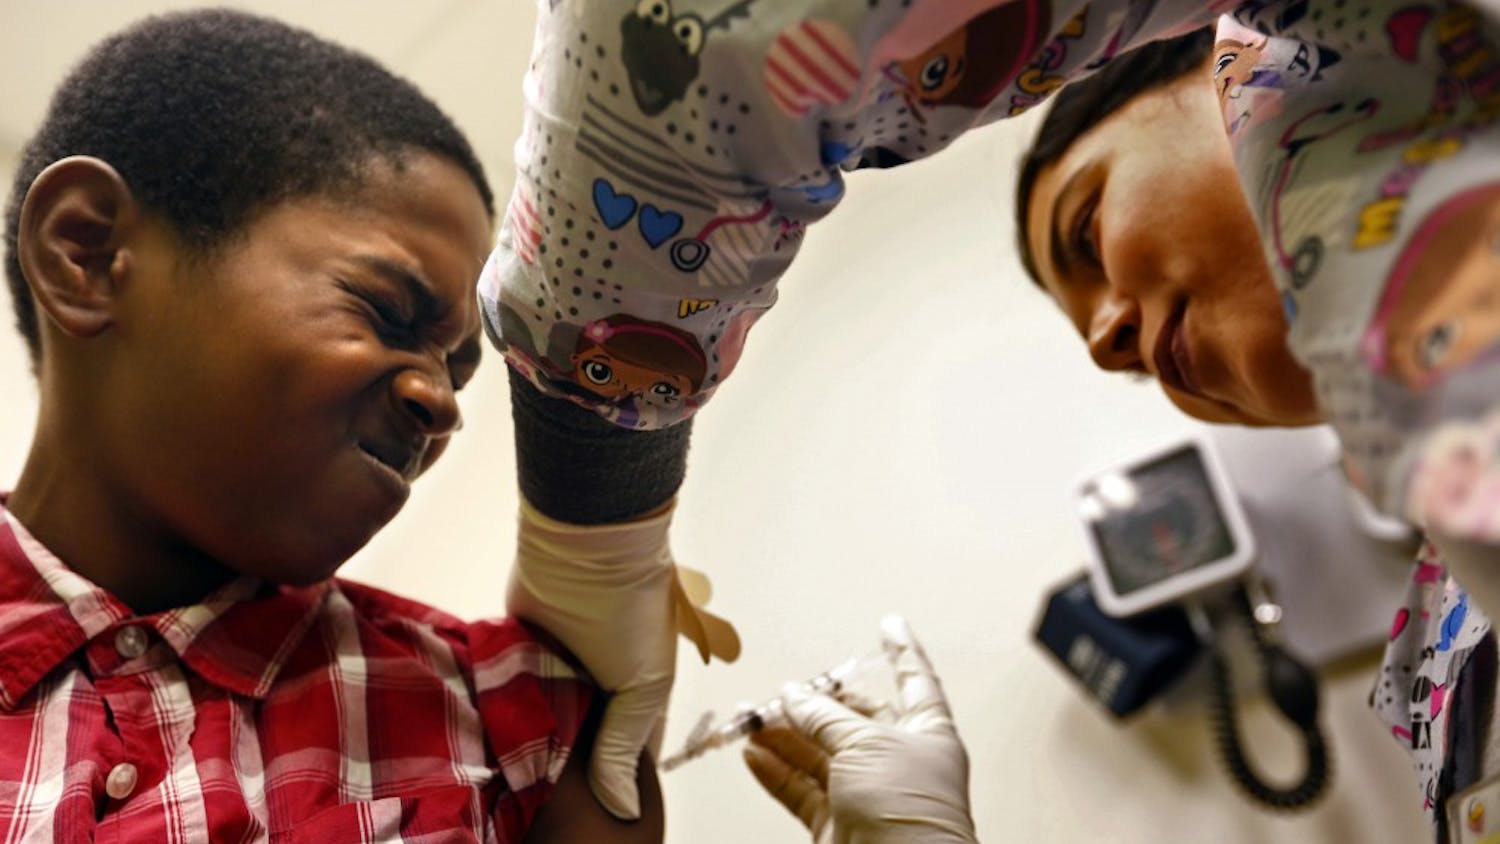 Desmond Sewell, 12, receives his vaccinations, including for TDAP against pertussis, or whooping cough, from Medical Assistant Jessica Reyes at the Lou Colen Children's Health and Wellness Center in Los Angeles on Aug. 4, 2017. (Genaro Molina/Los Angeles Times/TNS)